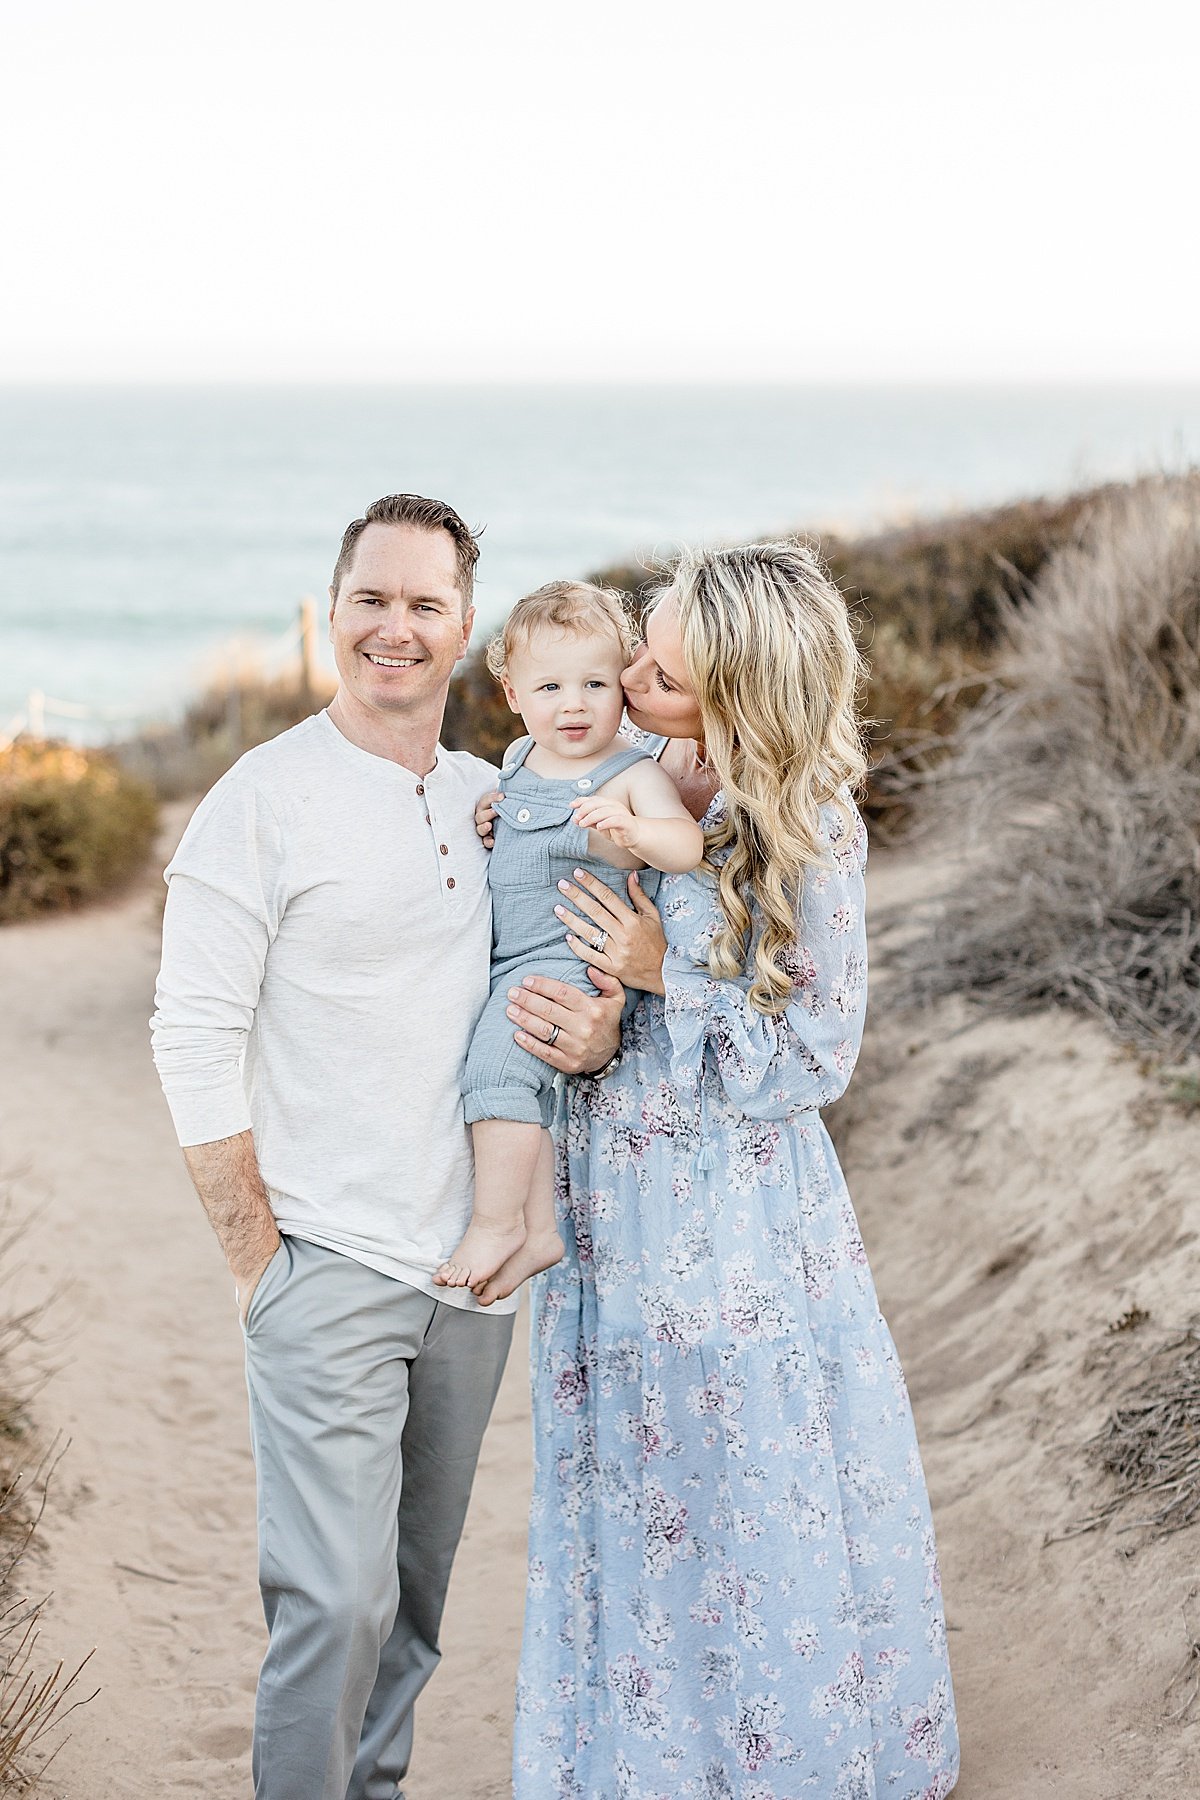 Mom kissing baby boy on Beach, Dad holding Baby during Sunset | Ambre Williams Photography in Newport Beach, California